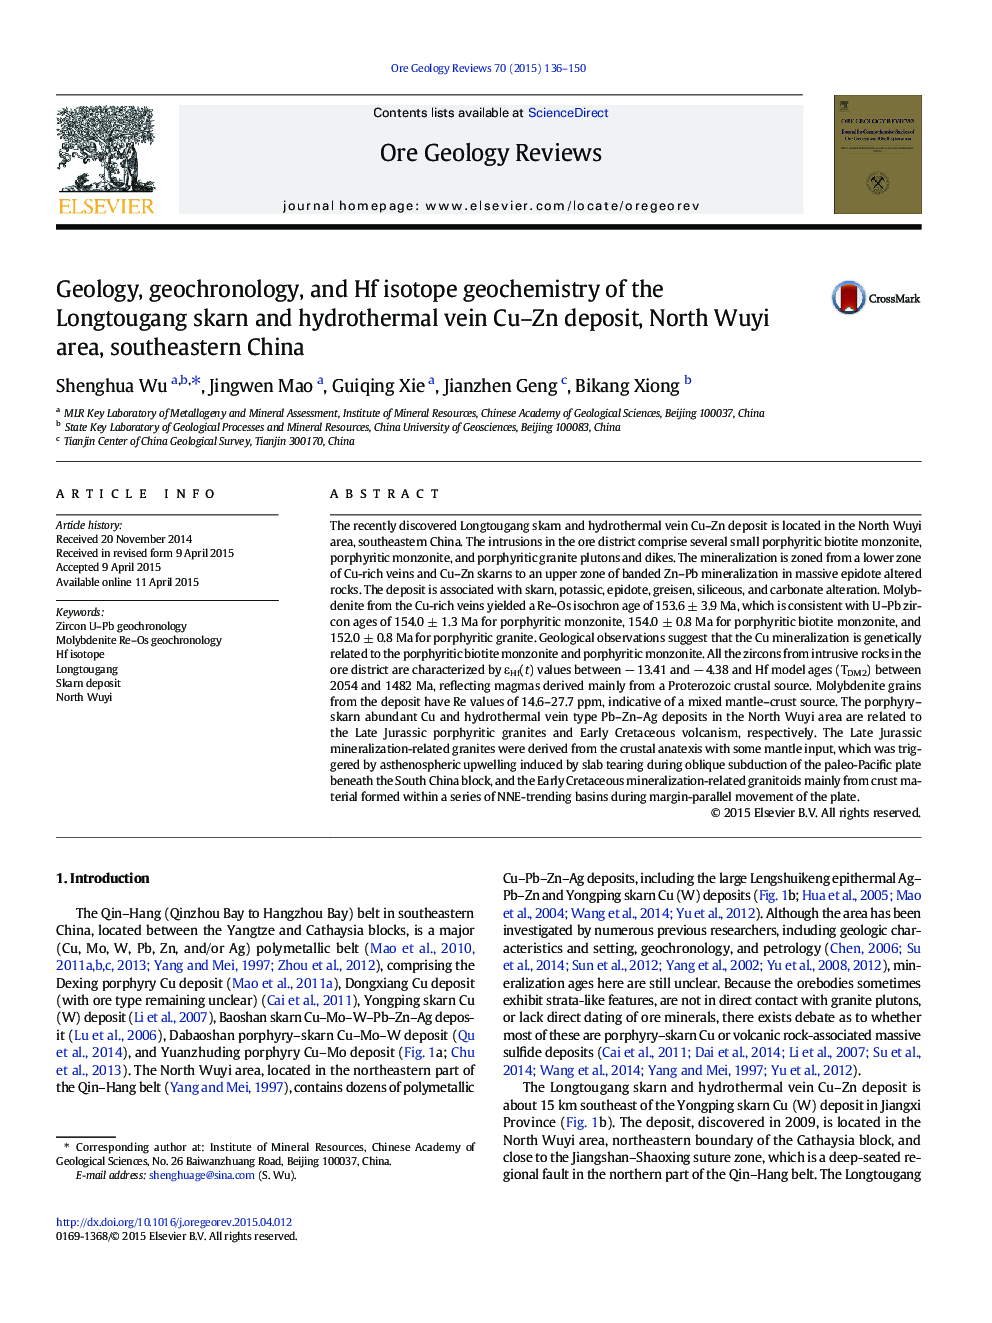 Geology, geochronology, and Hf isotope geochemistry of the Longtougang skarn and hydrothermal vein Cu–Zn deposit, North Wuyi area, southeastern China